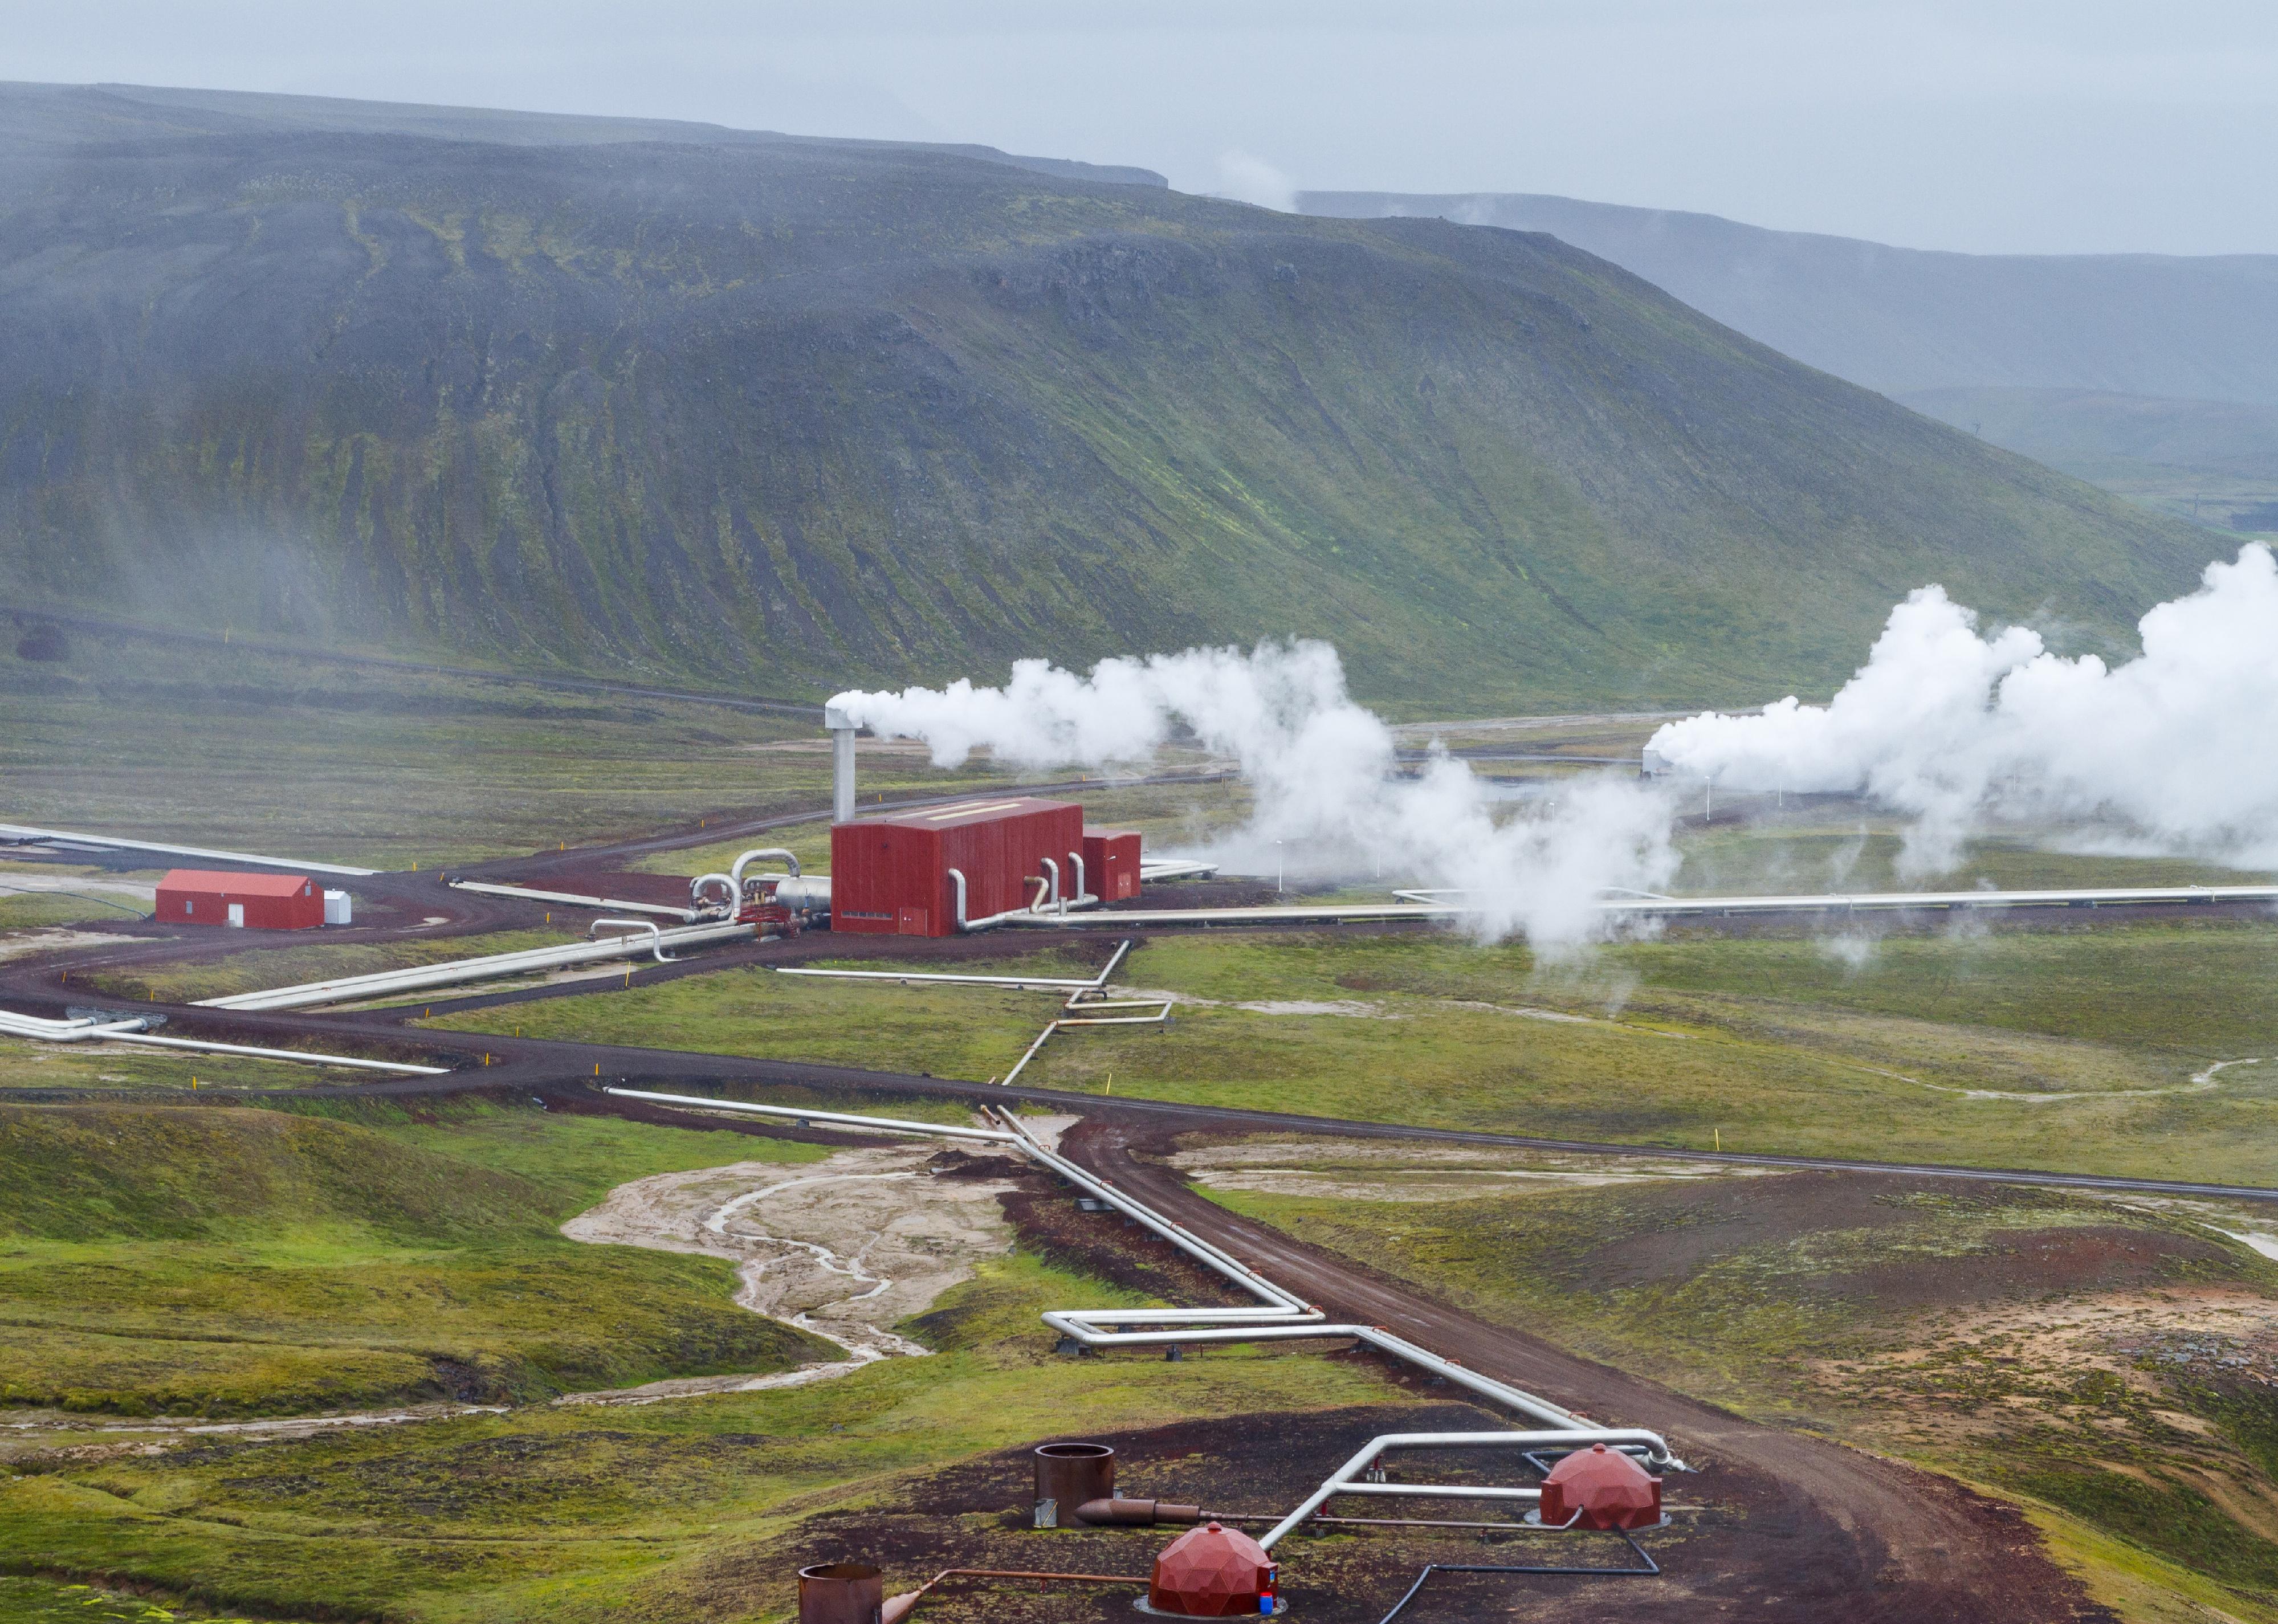 A series of red buildings and pipes at a geothermal power station surrounded by green land and mountains in Iceland.